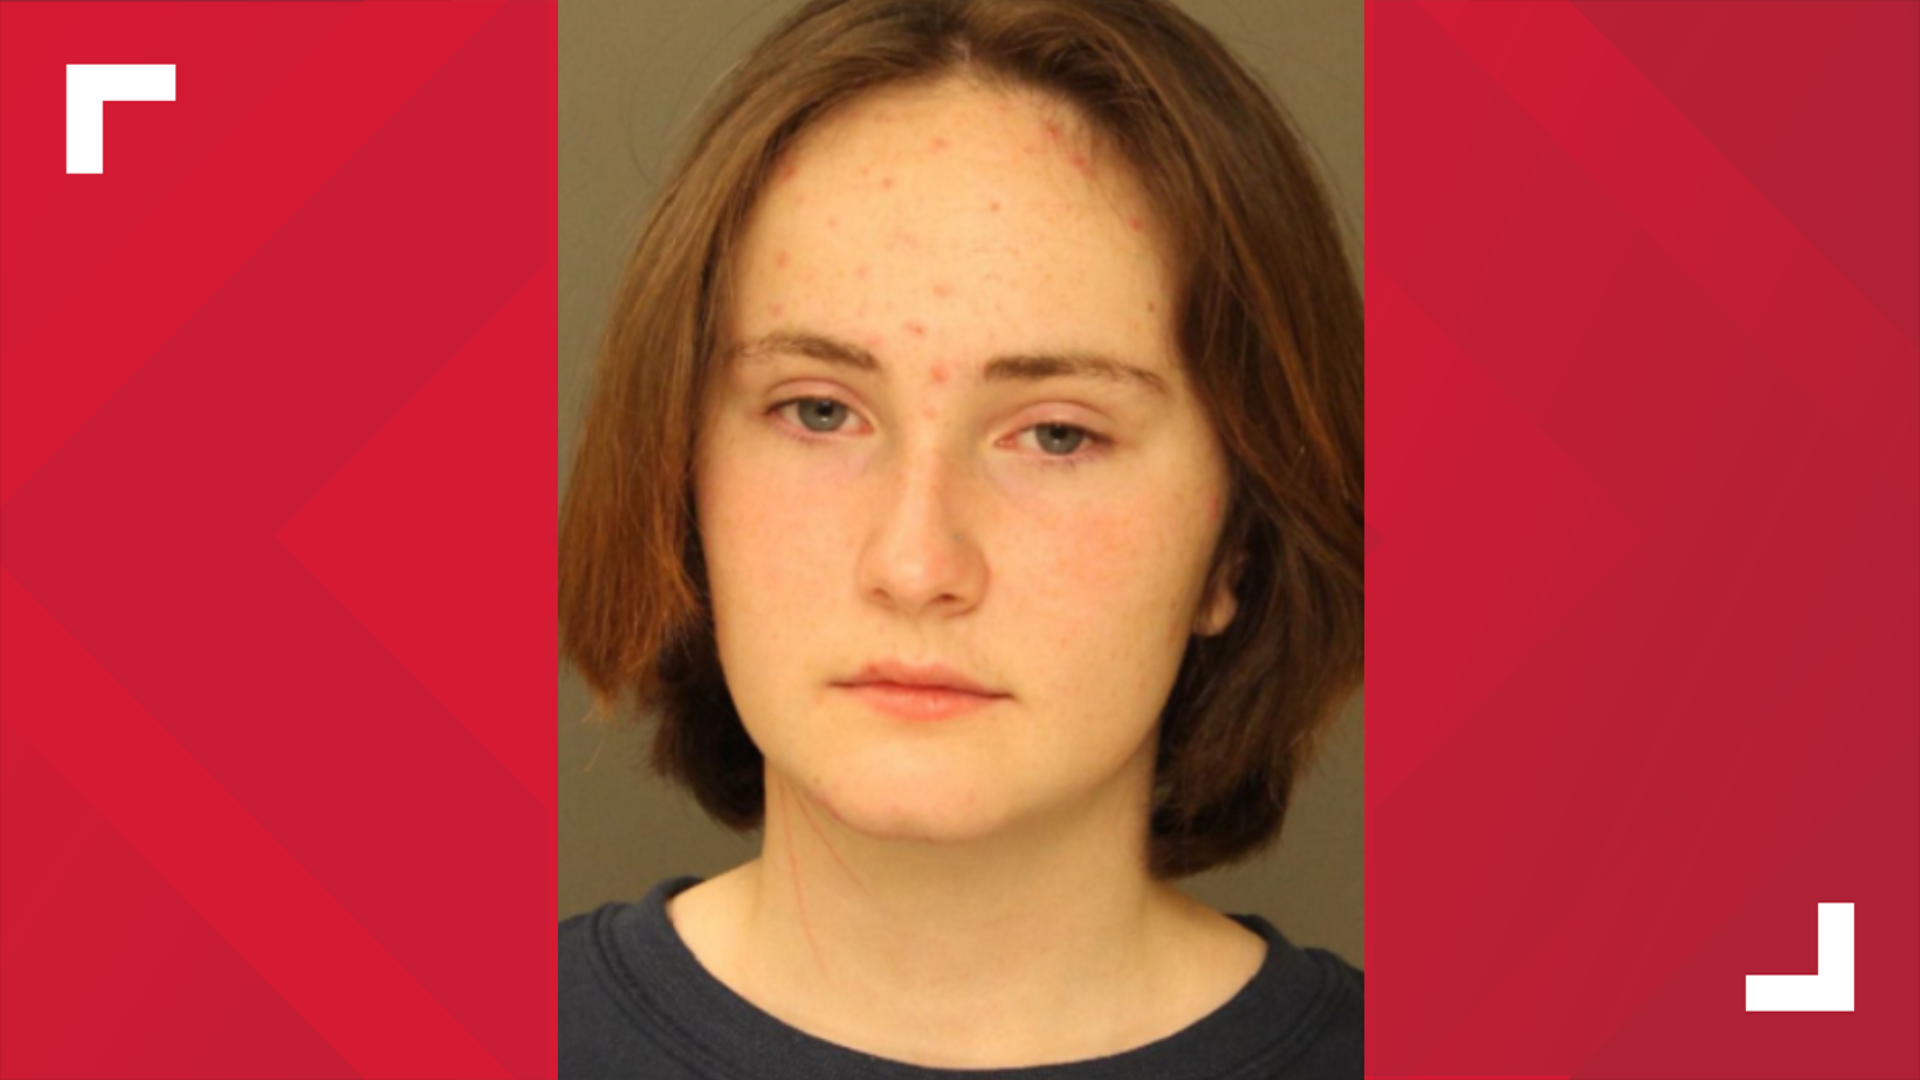 Claire Miller, 14, is accused of stabbing her 19-year-old sister, Helen, to death in their Manheim Township home early Monday morning.